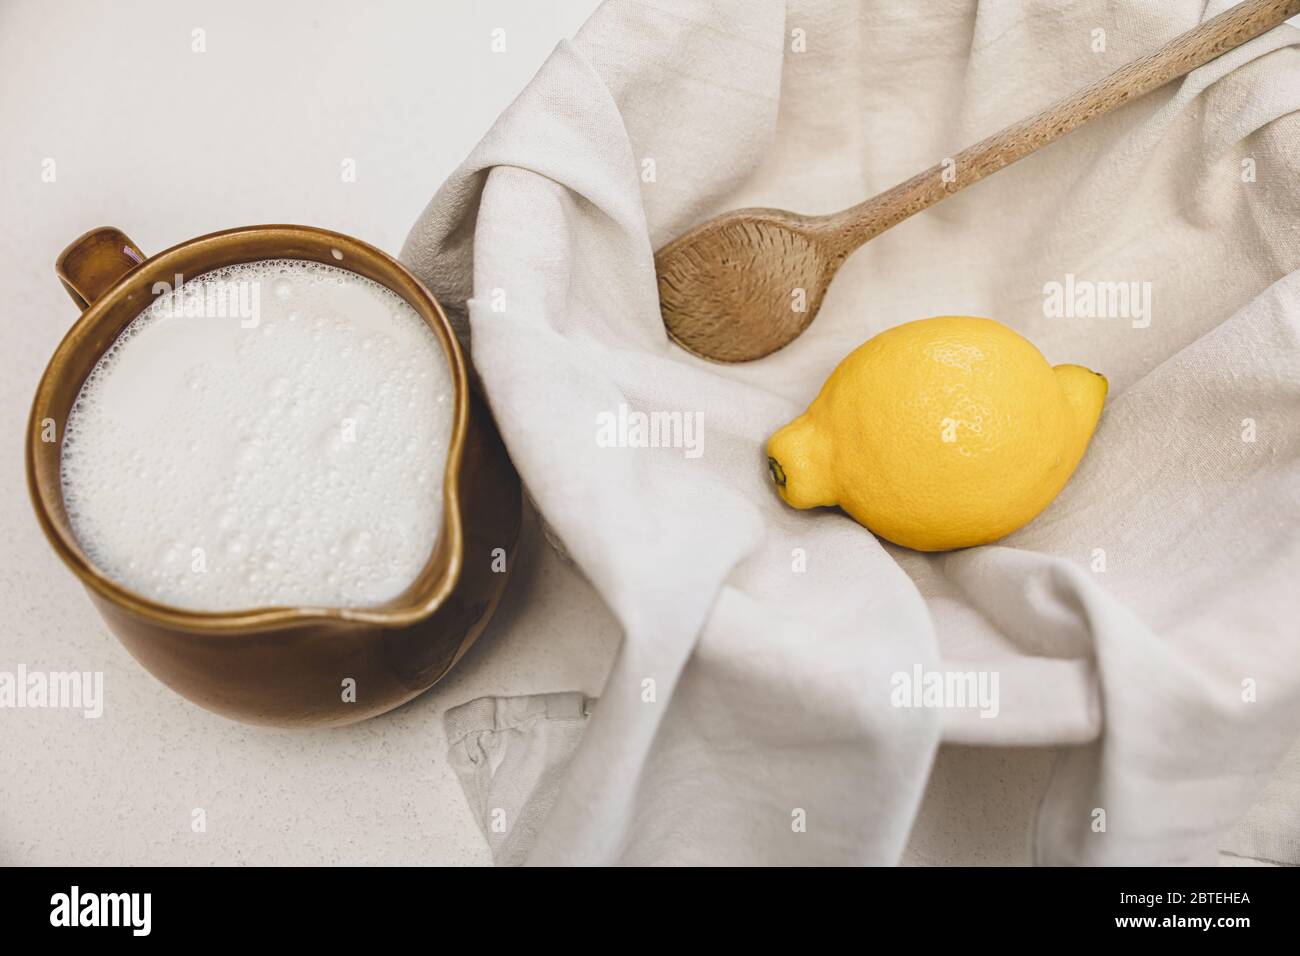 fresh cheese making recipe ingredients, milk, lemon and a cotton cloth, cheesemaking at home Stock Photo